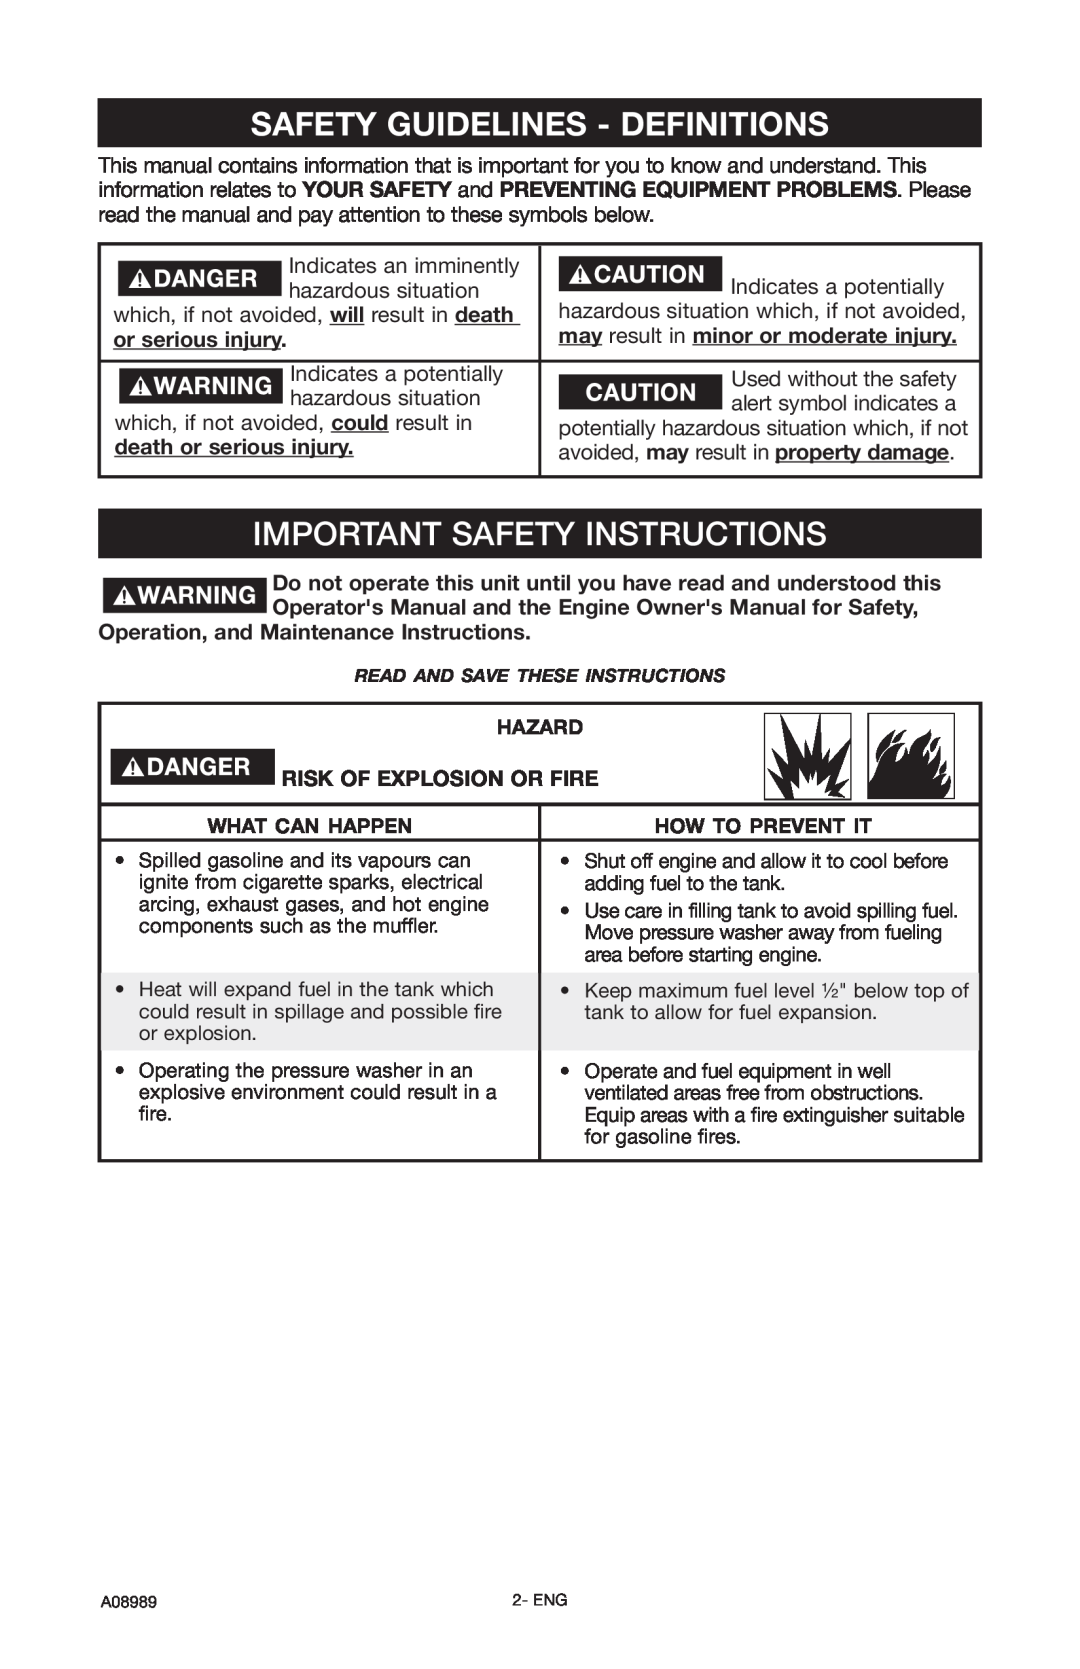 DeVillbiss Air Power Company S2600 Safety Guidelines - Definitions, Important Safety Instructions, or serious injury 